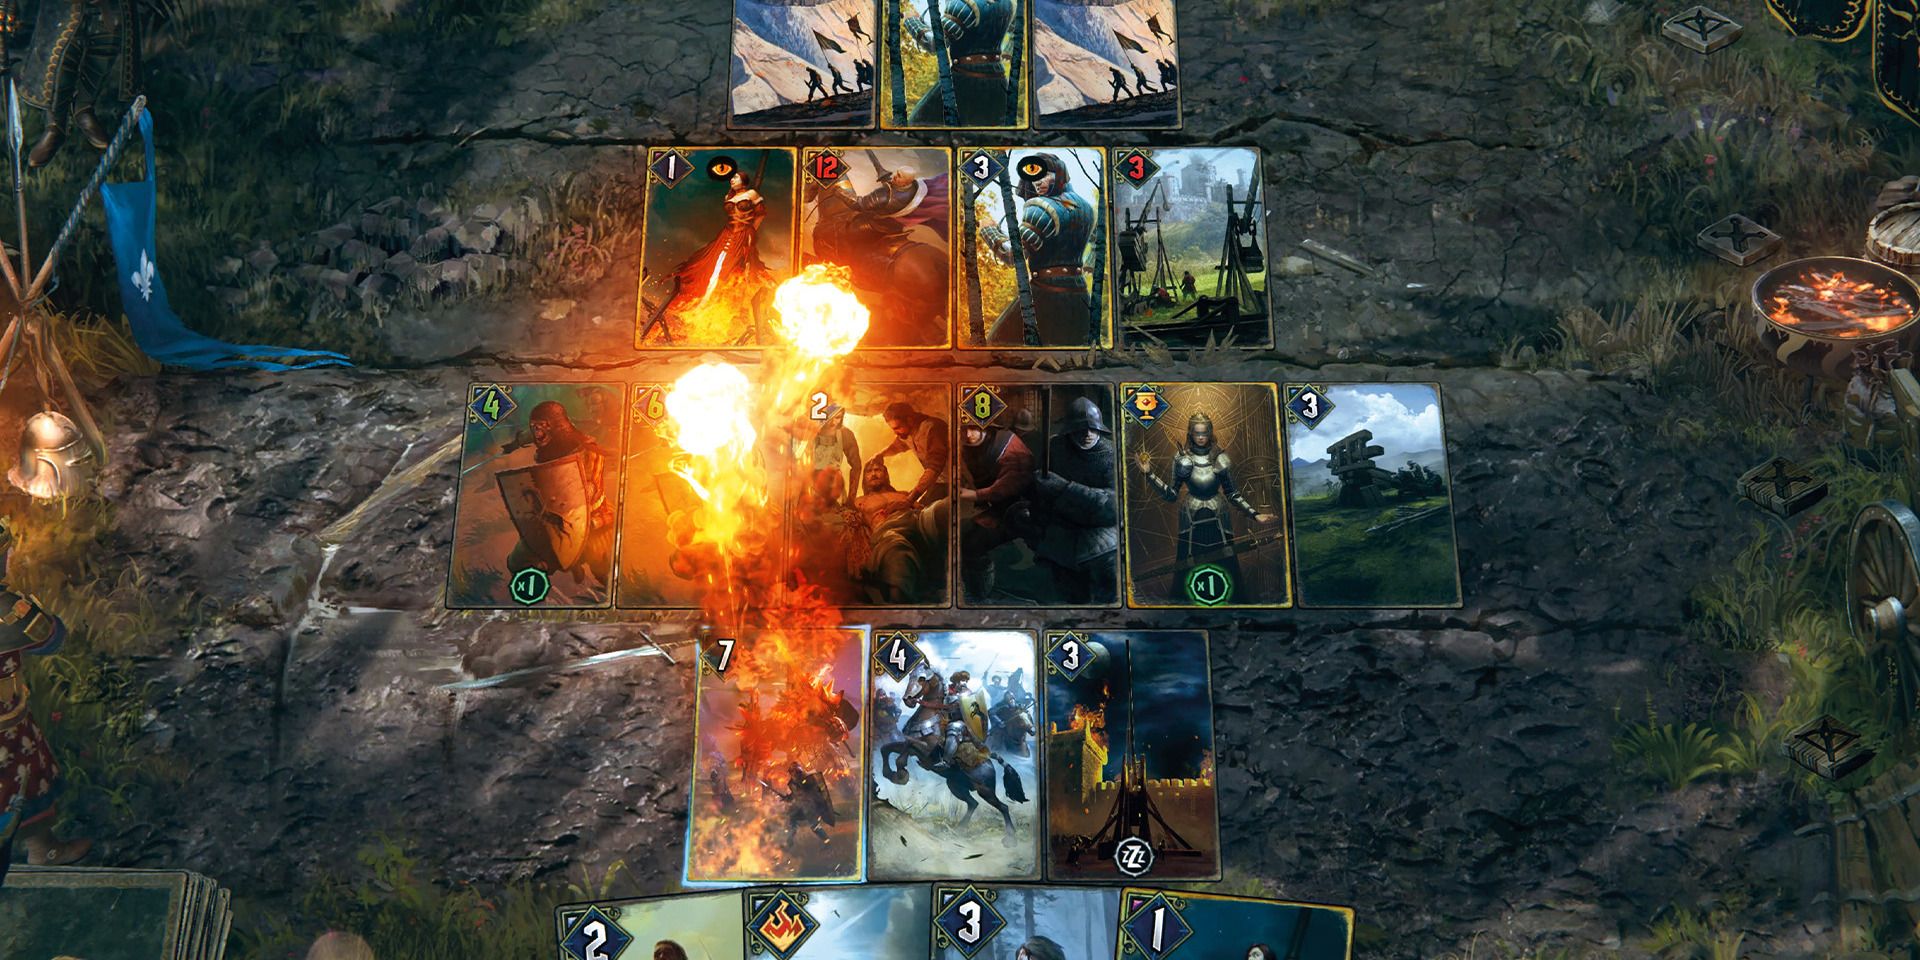 Gwent The Witcher Card Game PvP Mode